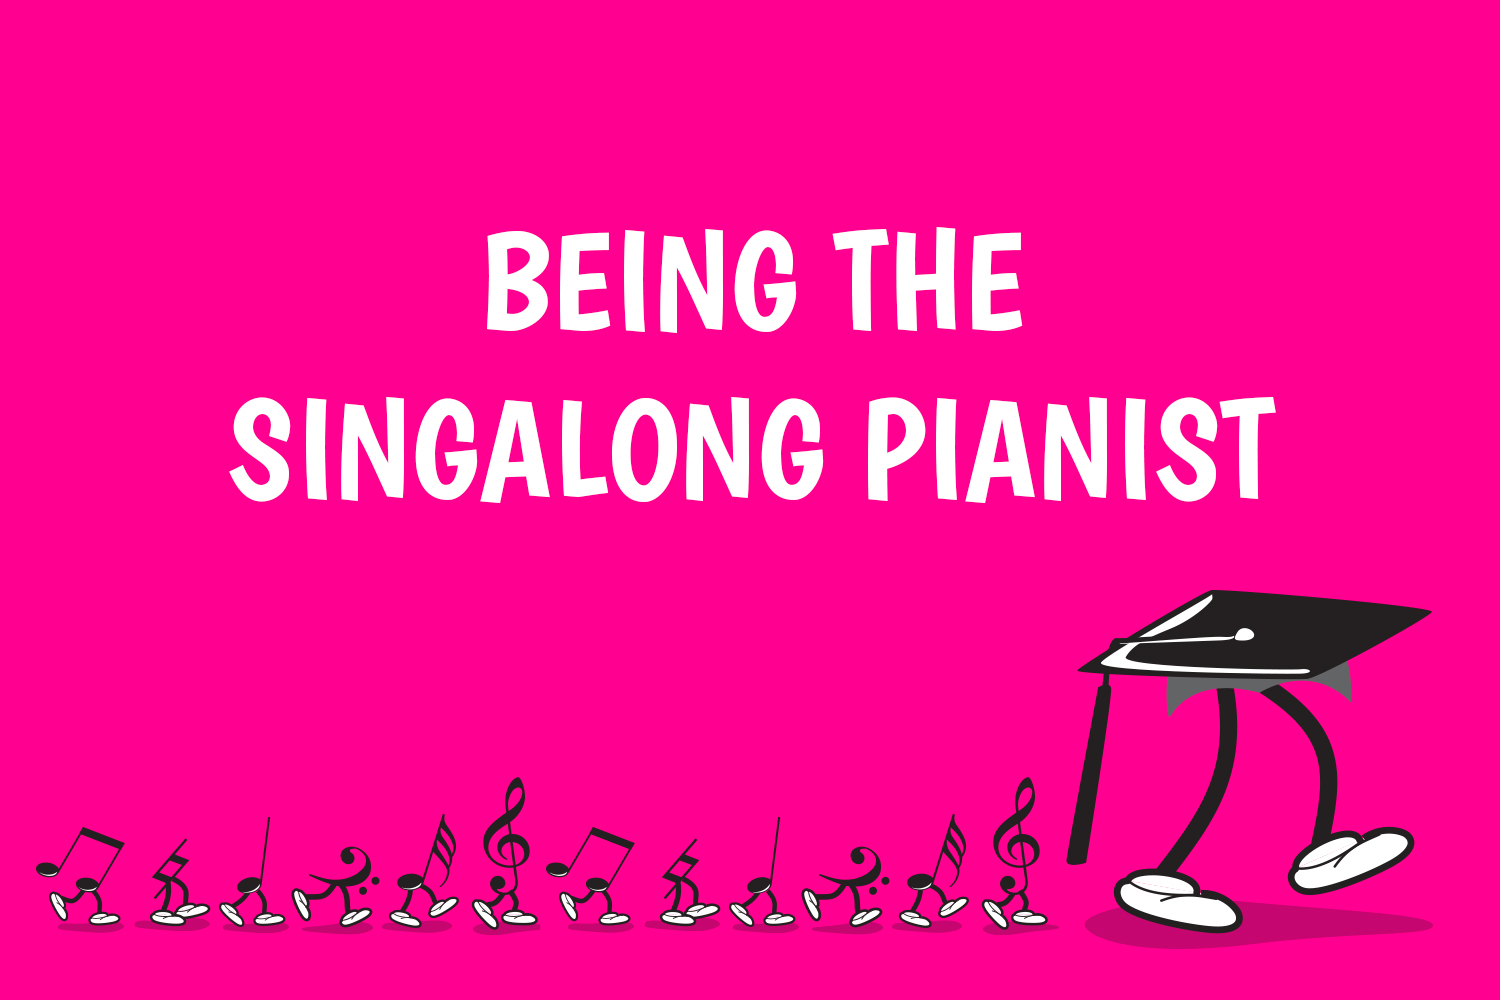 Being the singalong pianist